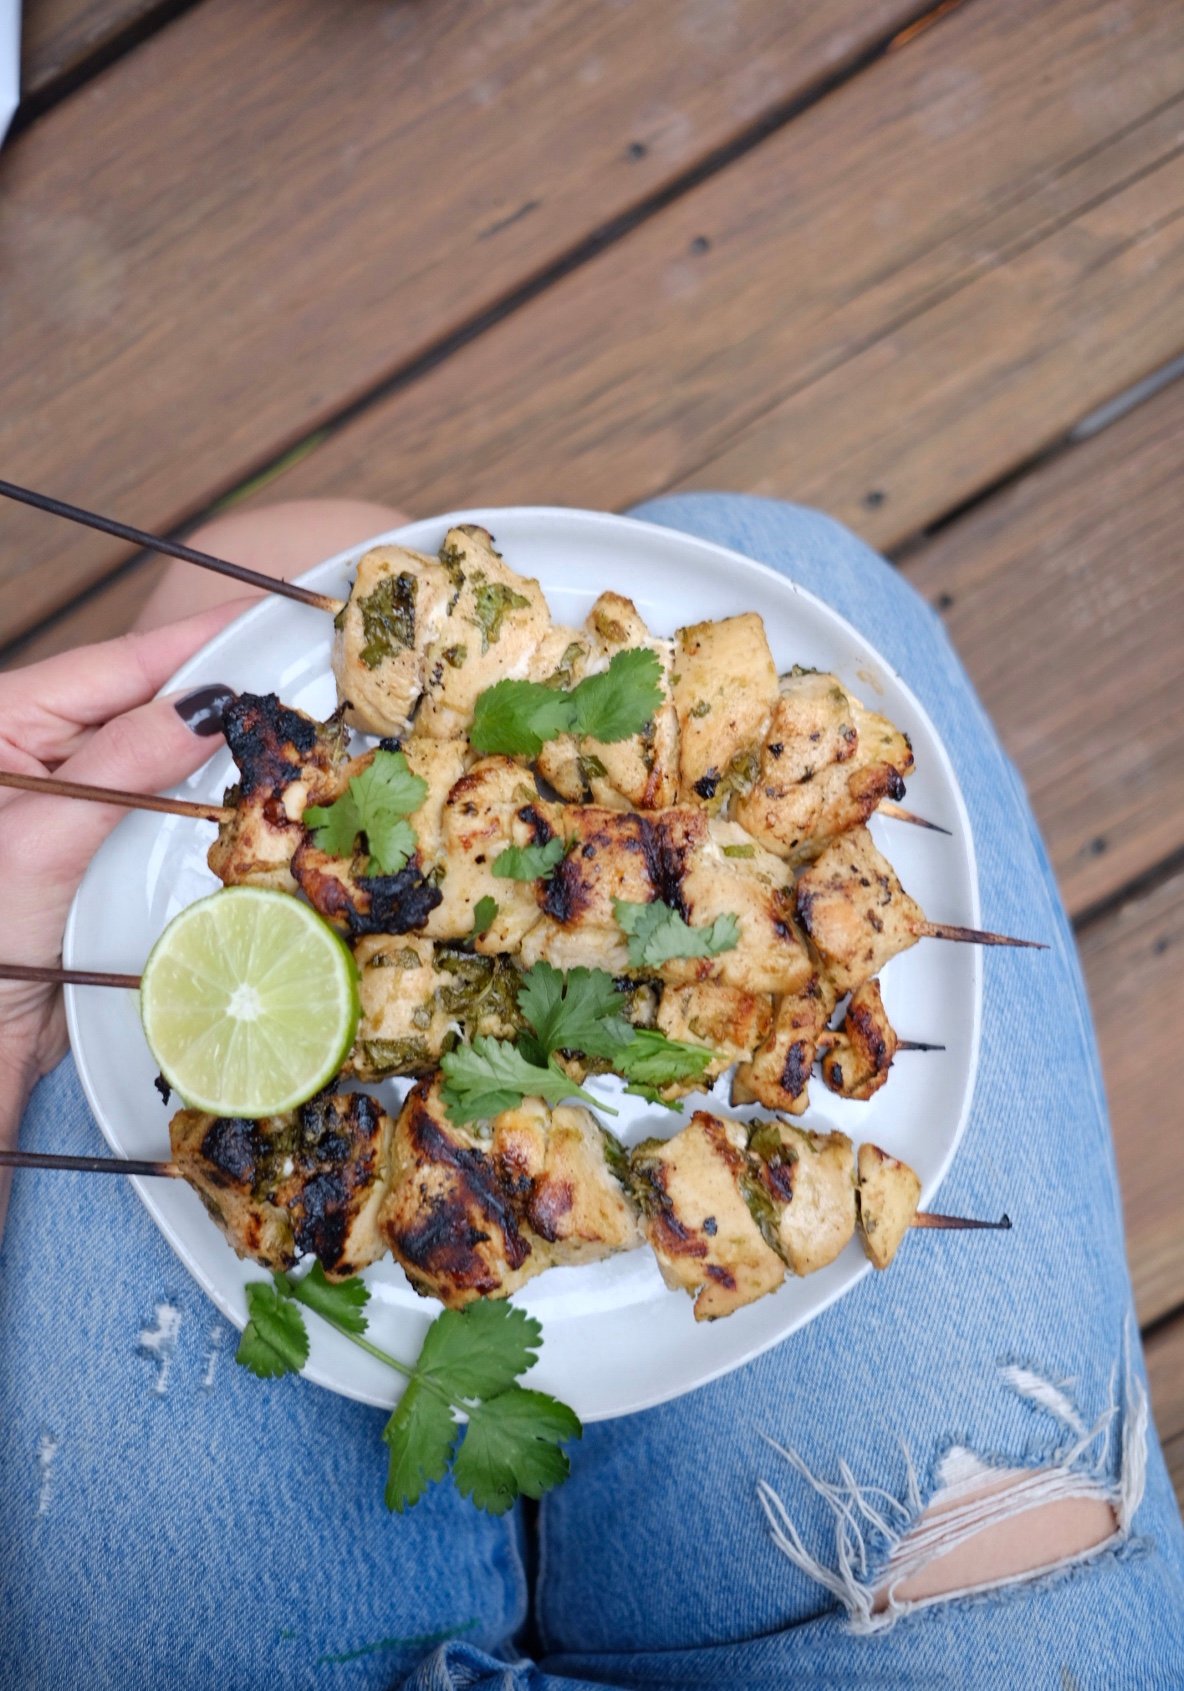 Lifestyle Blogger Chocolate & Lace shares her recipe for Cilantro Lime Skewers.